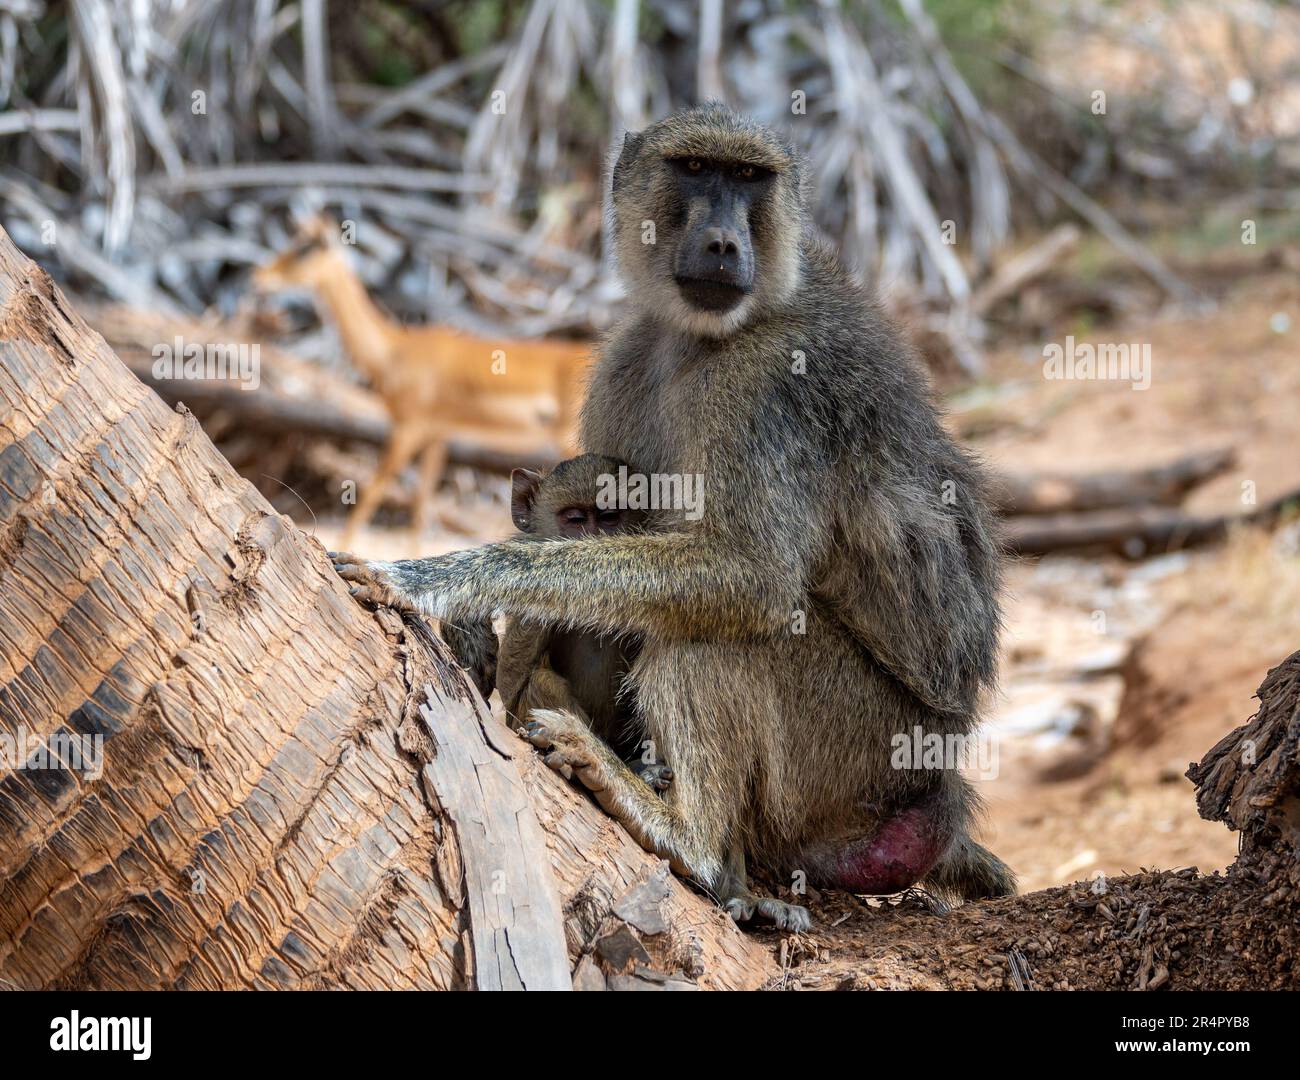 Olive Baboon (Papio anubis) mother with baby. Kenya, Africa. Stock Photo